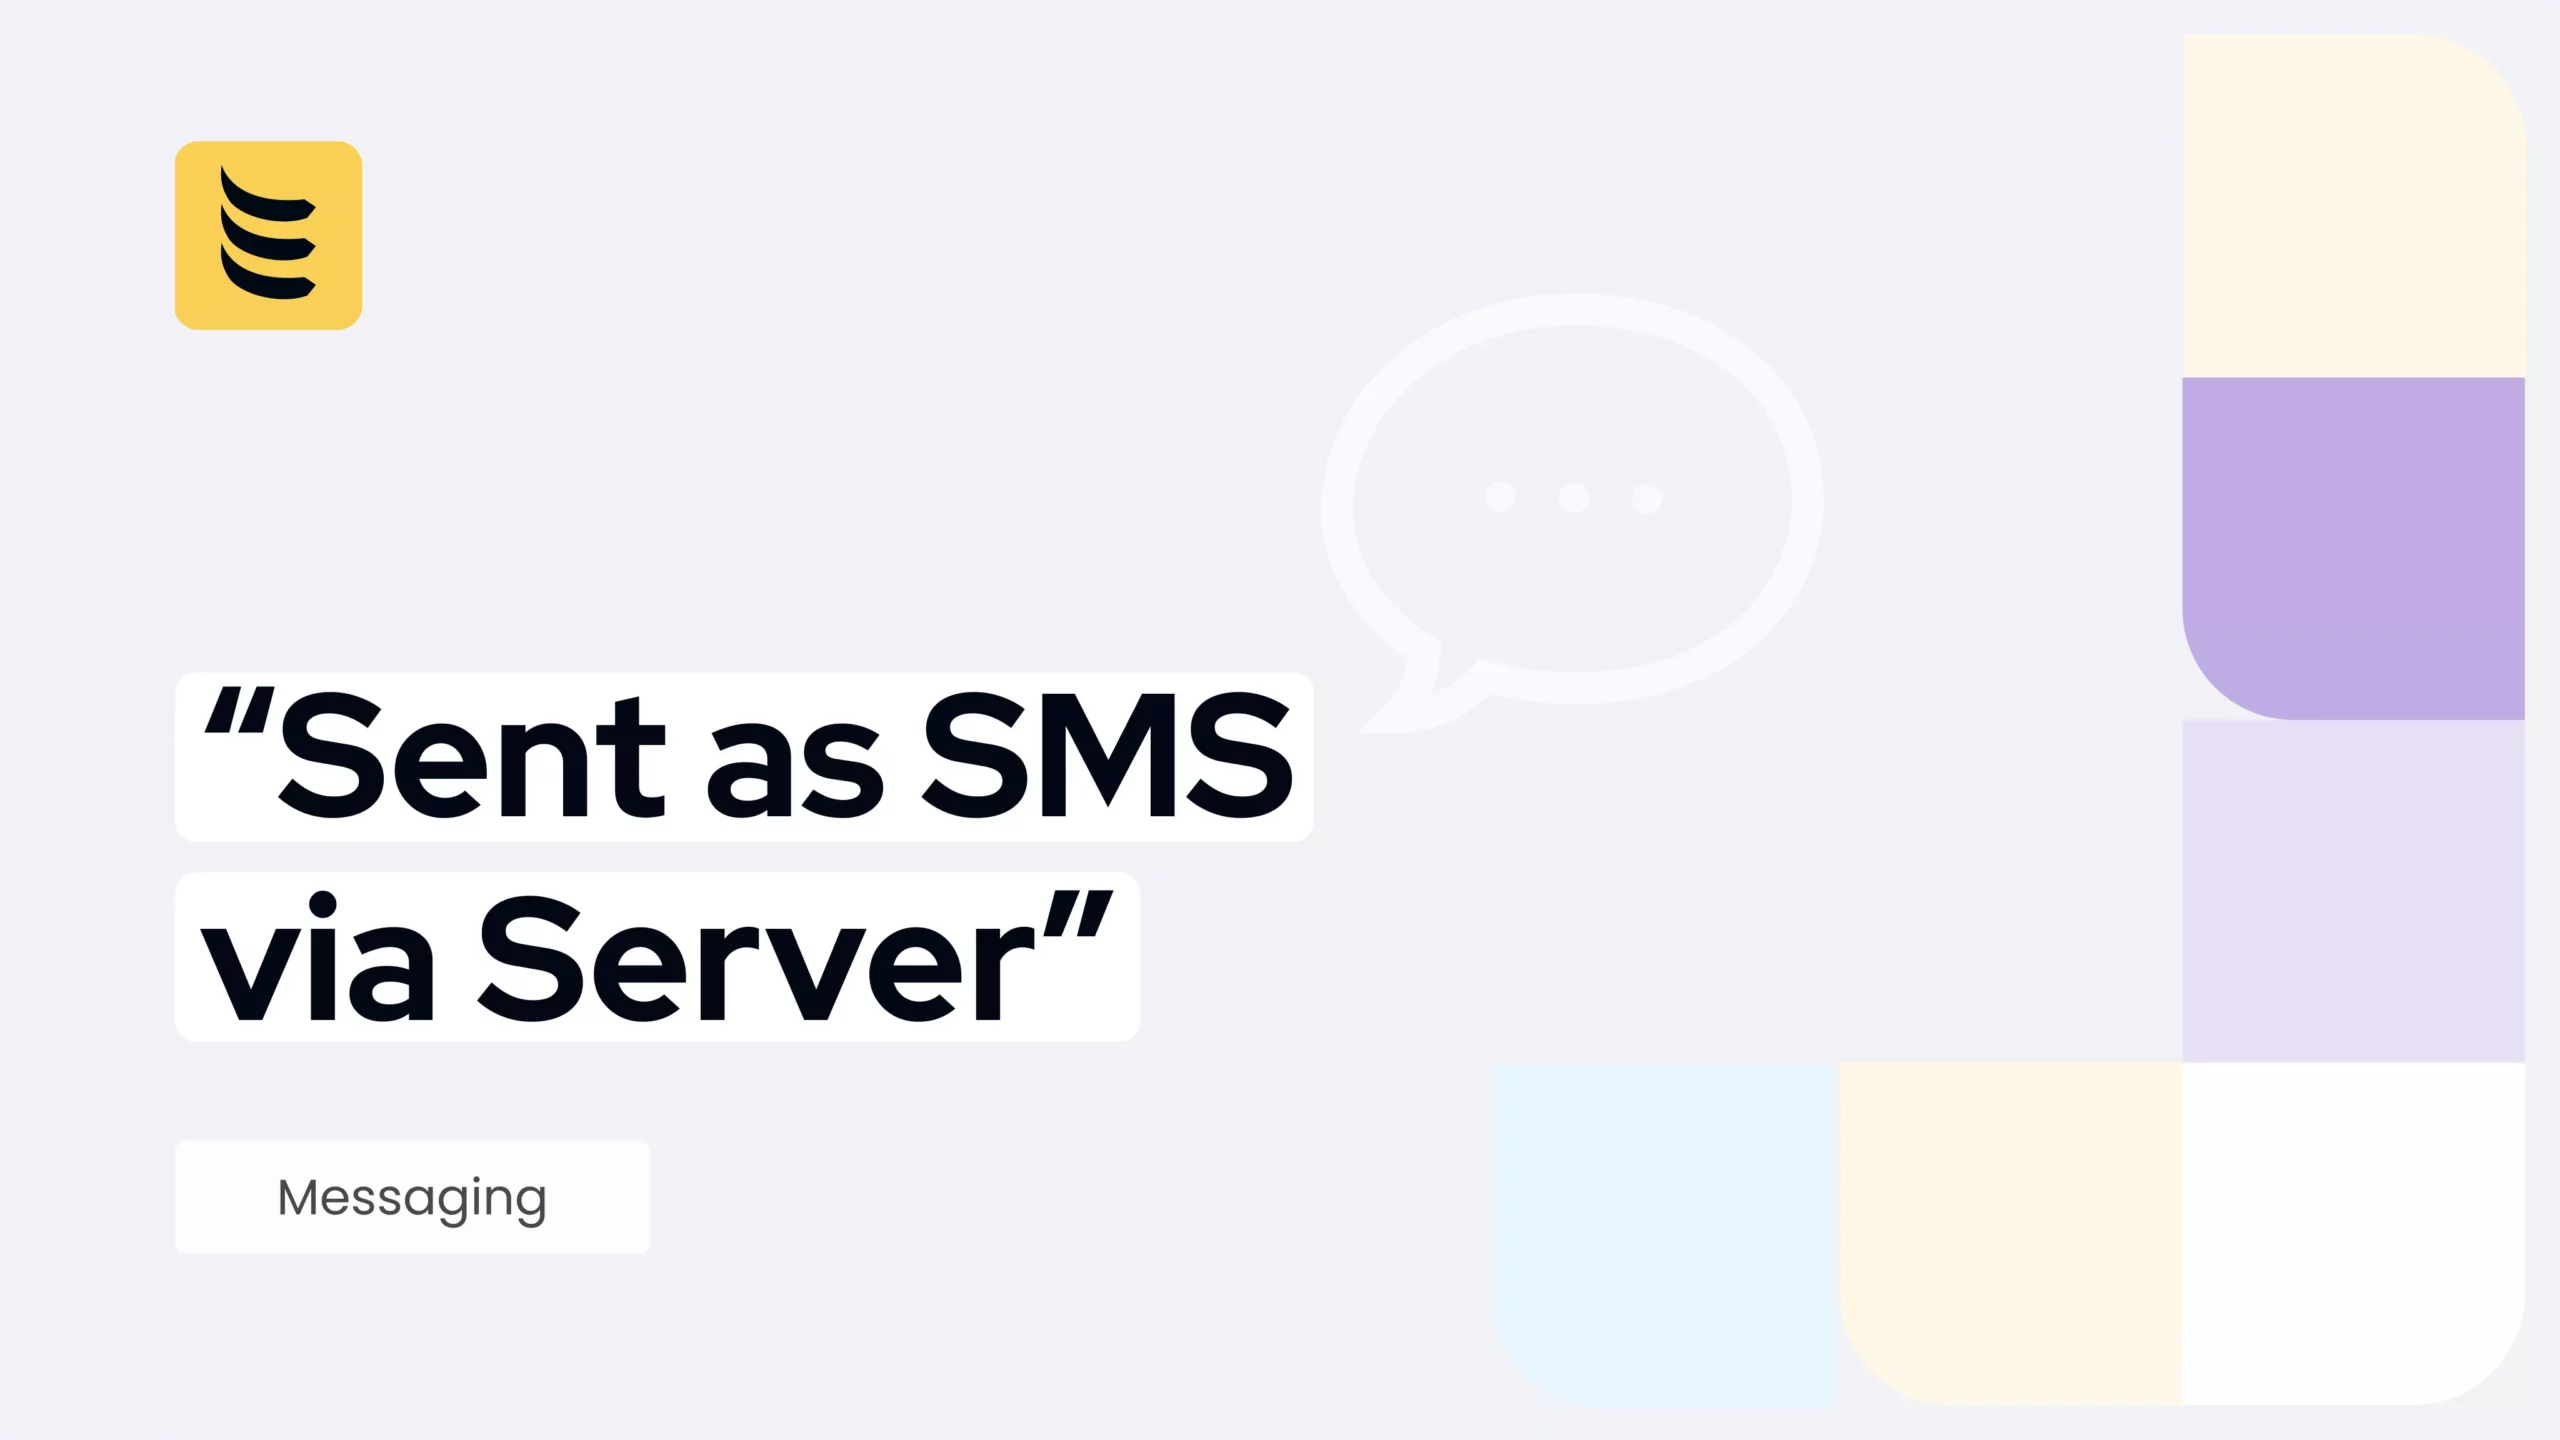 What Does “Sent as SMS via Server” Mean